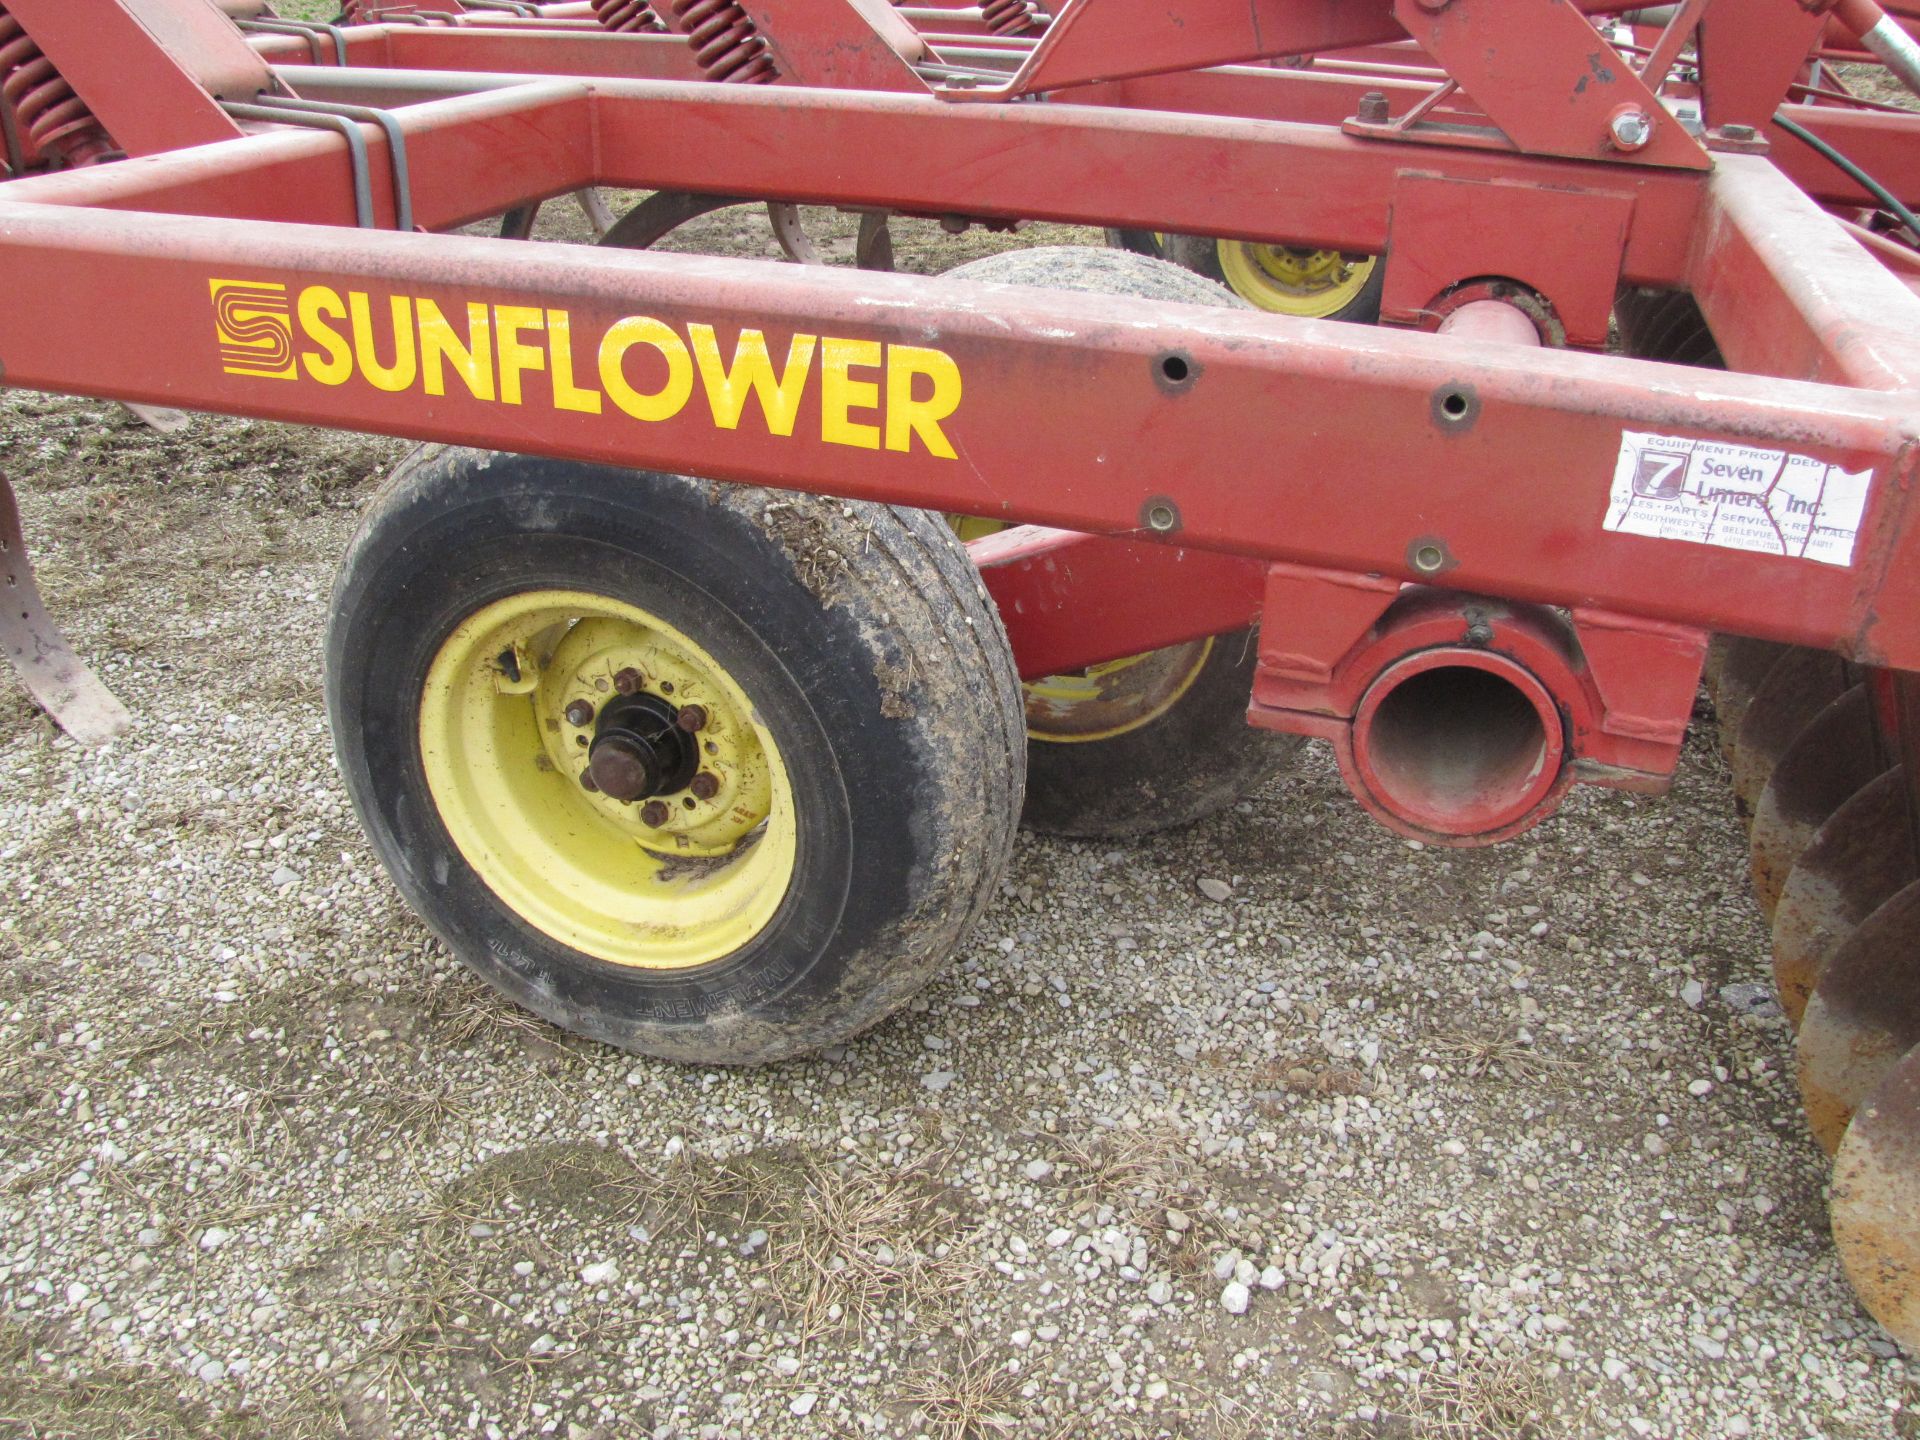 Sunflower 4212-14 11-Shank Disc Chisel Plow - Image 11 of 24